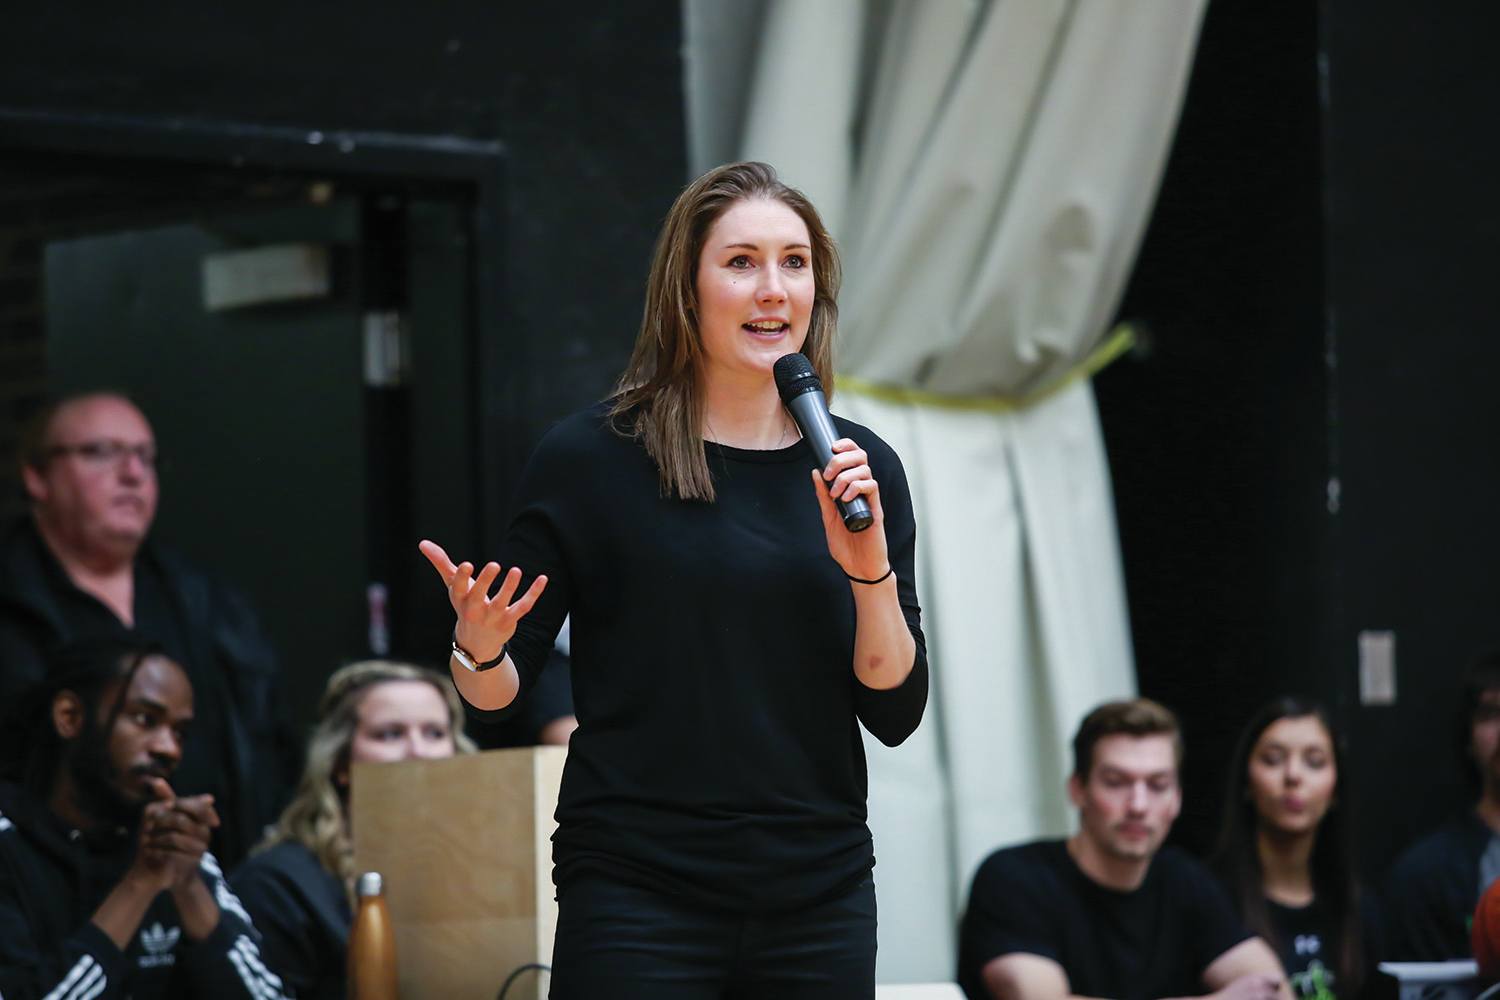 MAKING NOISE - Two-time Olympic speed skater Anastasia Bucsis spoke to students at Red Deer College about the importance of mental health awareness last week. Bucsis was at RDC as part of the nation-wide Make Some Noise for Mental Health Campaign.